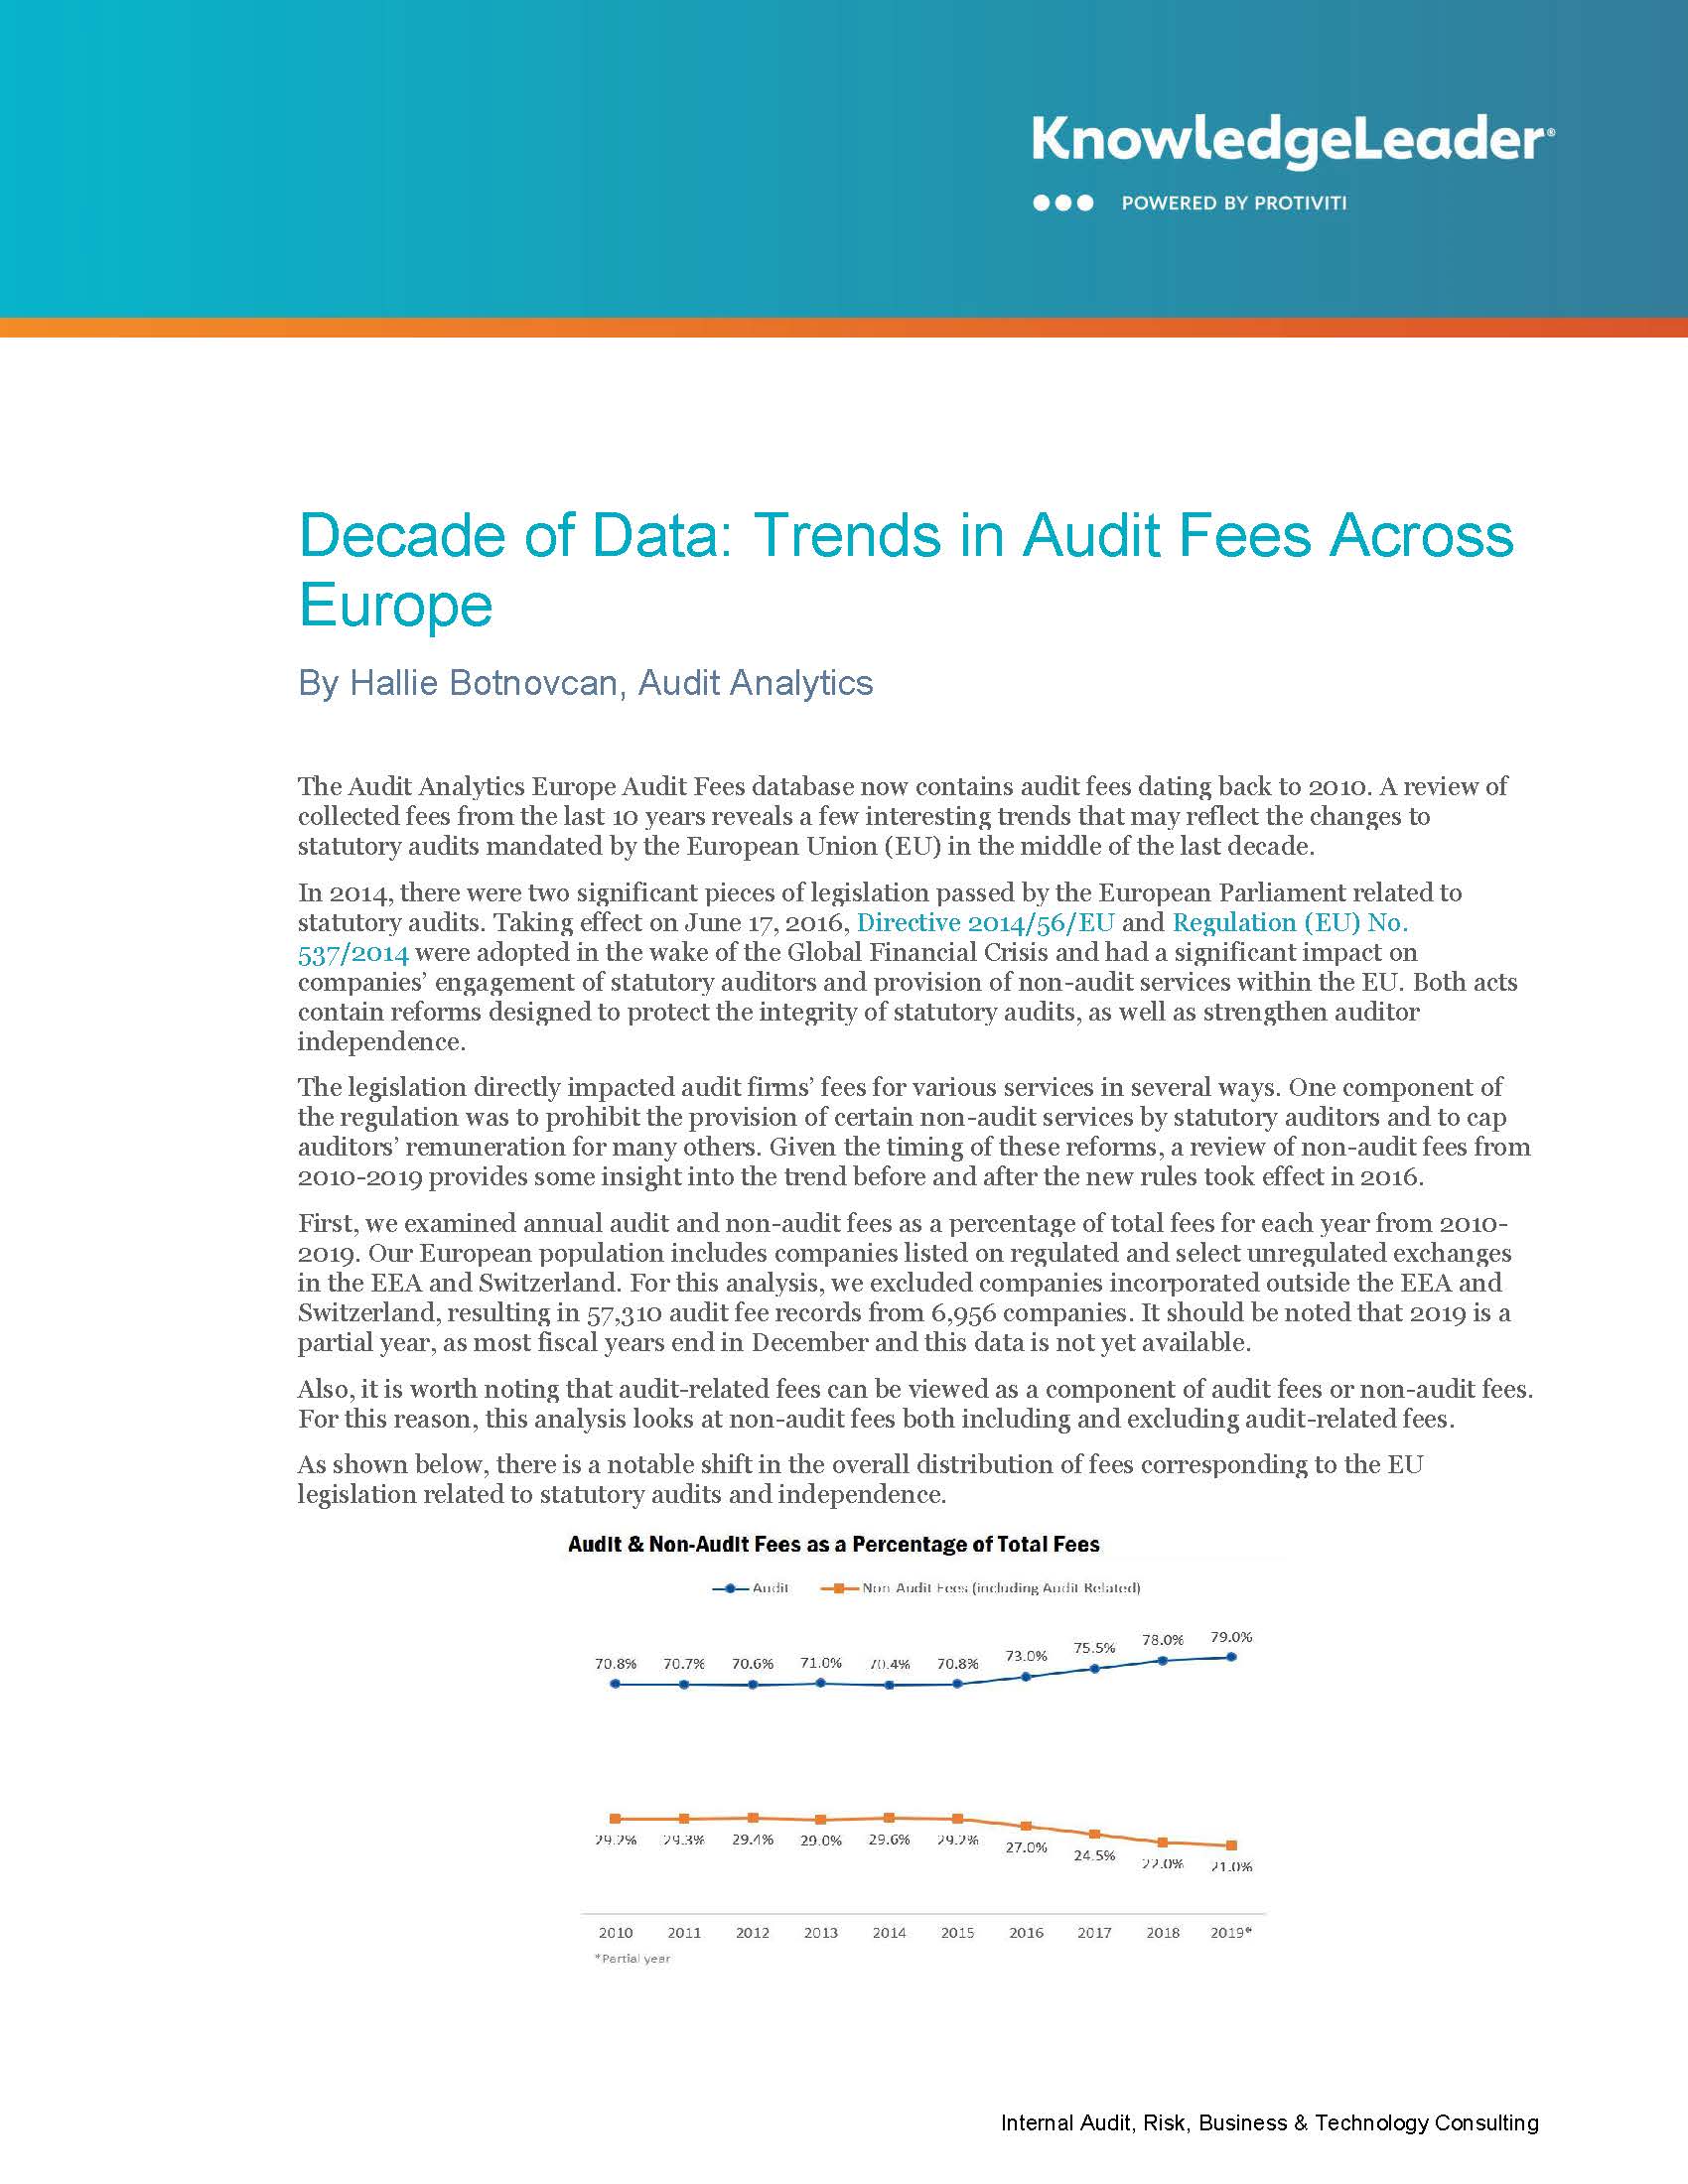 Decade of Data Trends in Audit Fees Across Europe